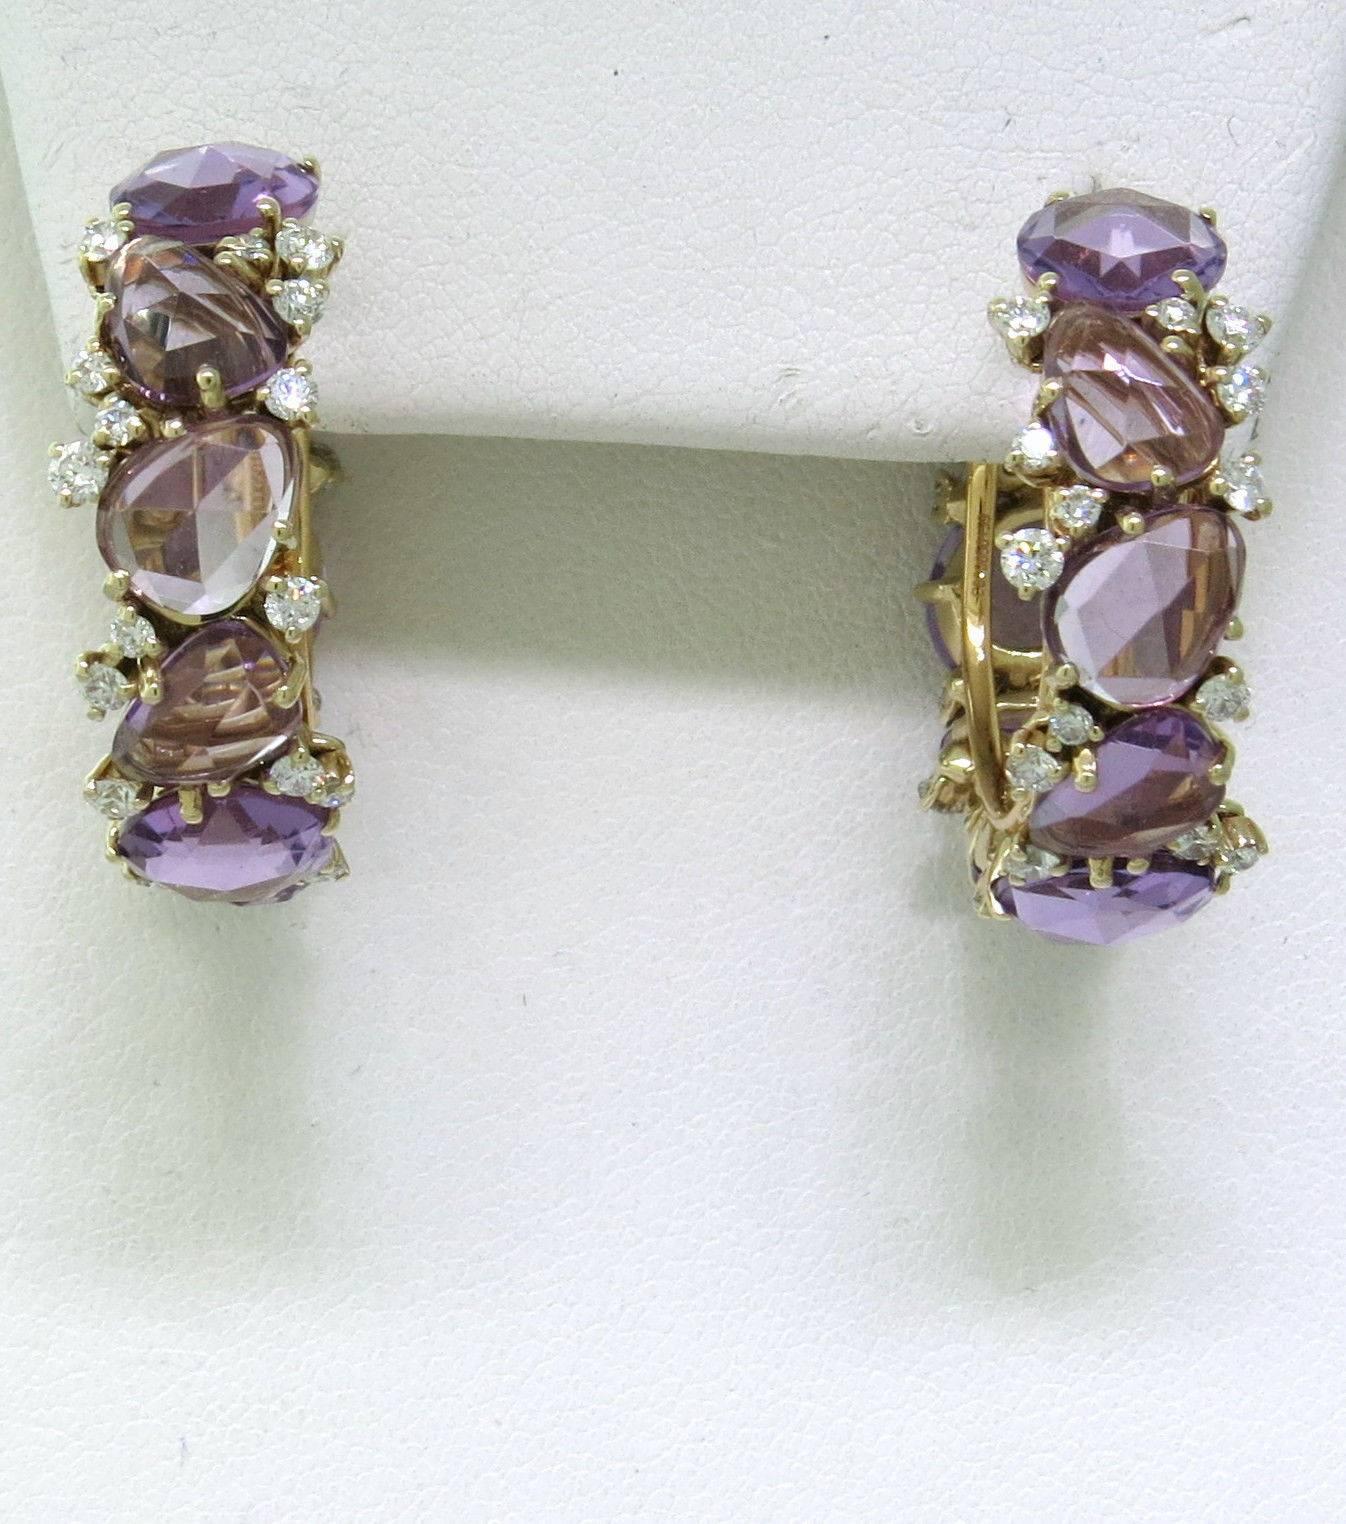 A pair of new impressive hoop earrings, crafted by Pomellato for Lulu collection, decorated with amethyst gemstones and approximately 1.02ctw in G/VS diamonds. Hoops are 28mm in diameter and 8.5mm wide. Weight - 17.3 grams
Retail $17100